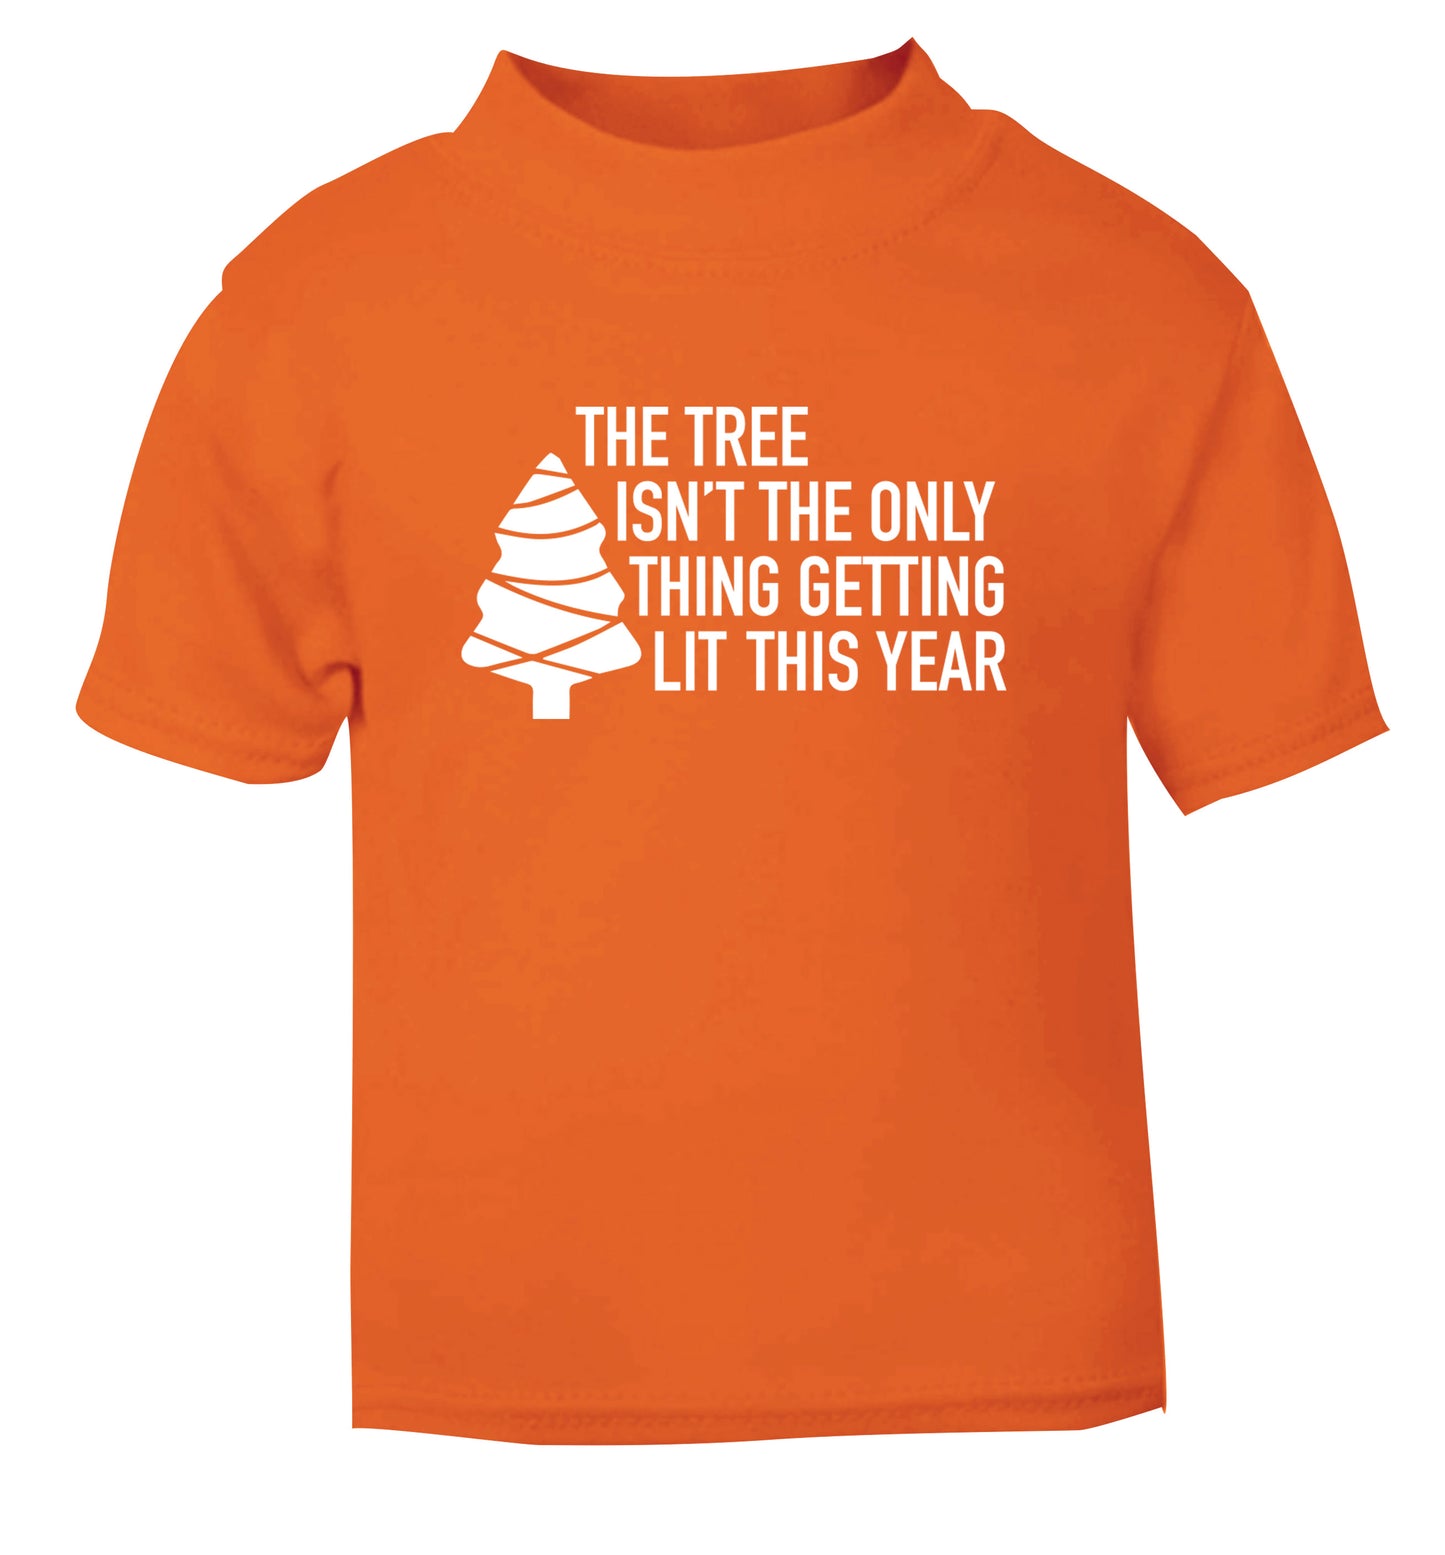 The tree isn't the only thing getting lit this year orange Baby Toddler Tshirt 2 Years